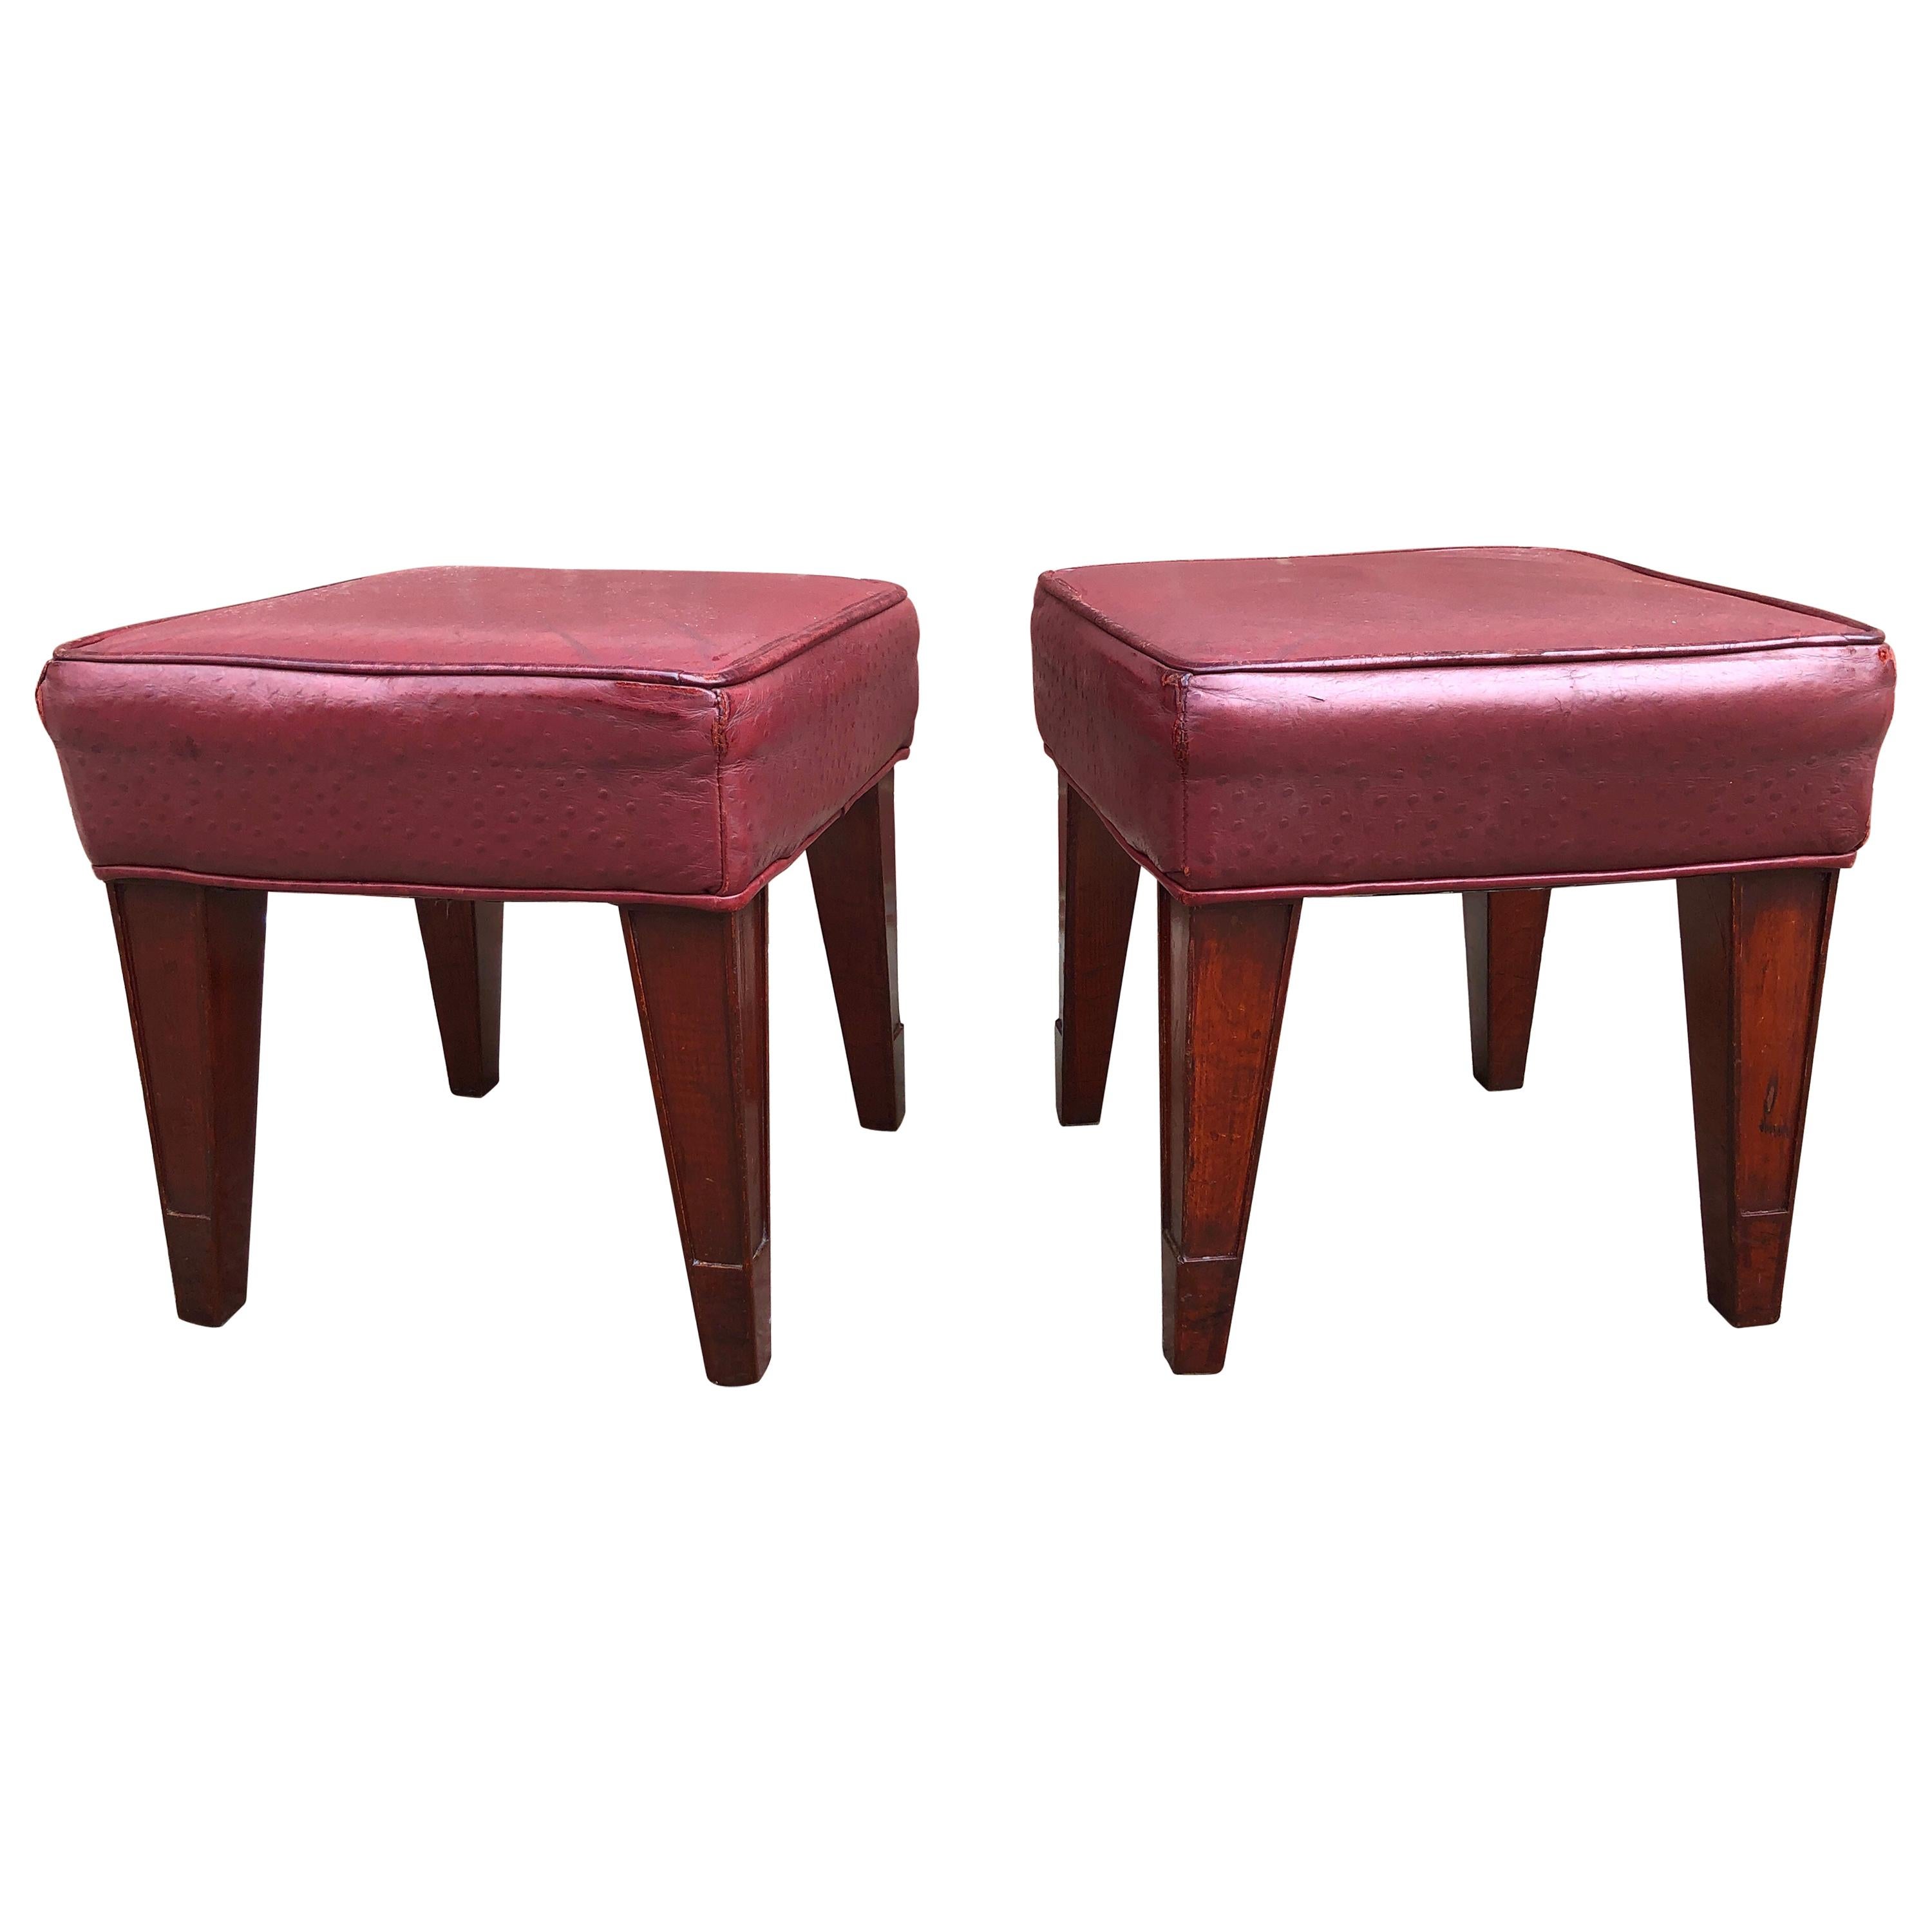 Pair of Philippe Starck Custom Stools from the Clift Hotel, San Francisco For Sale